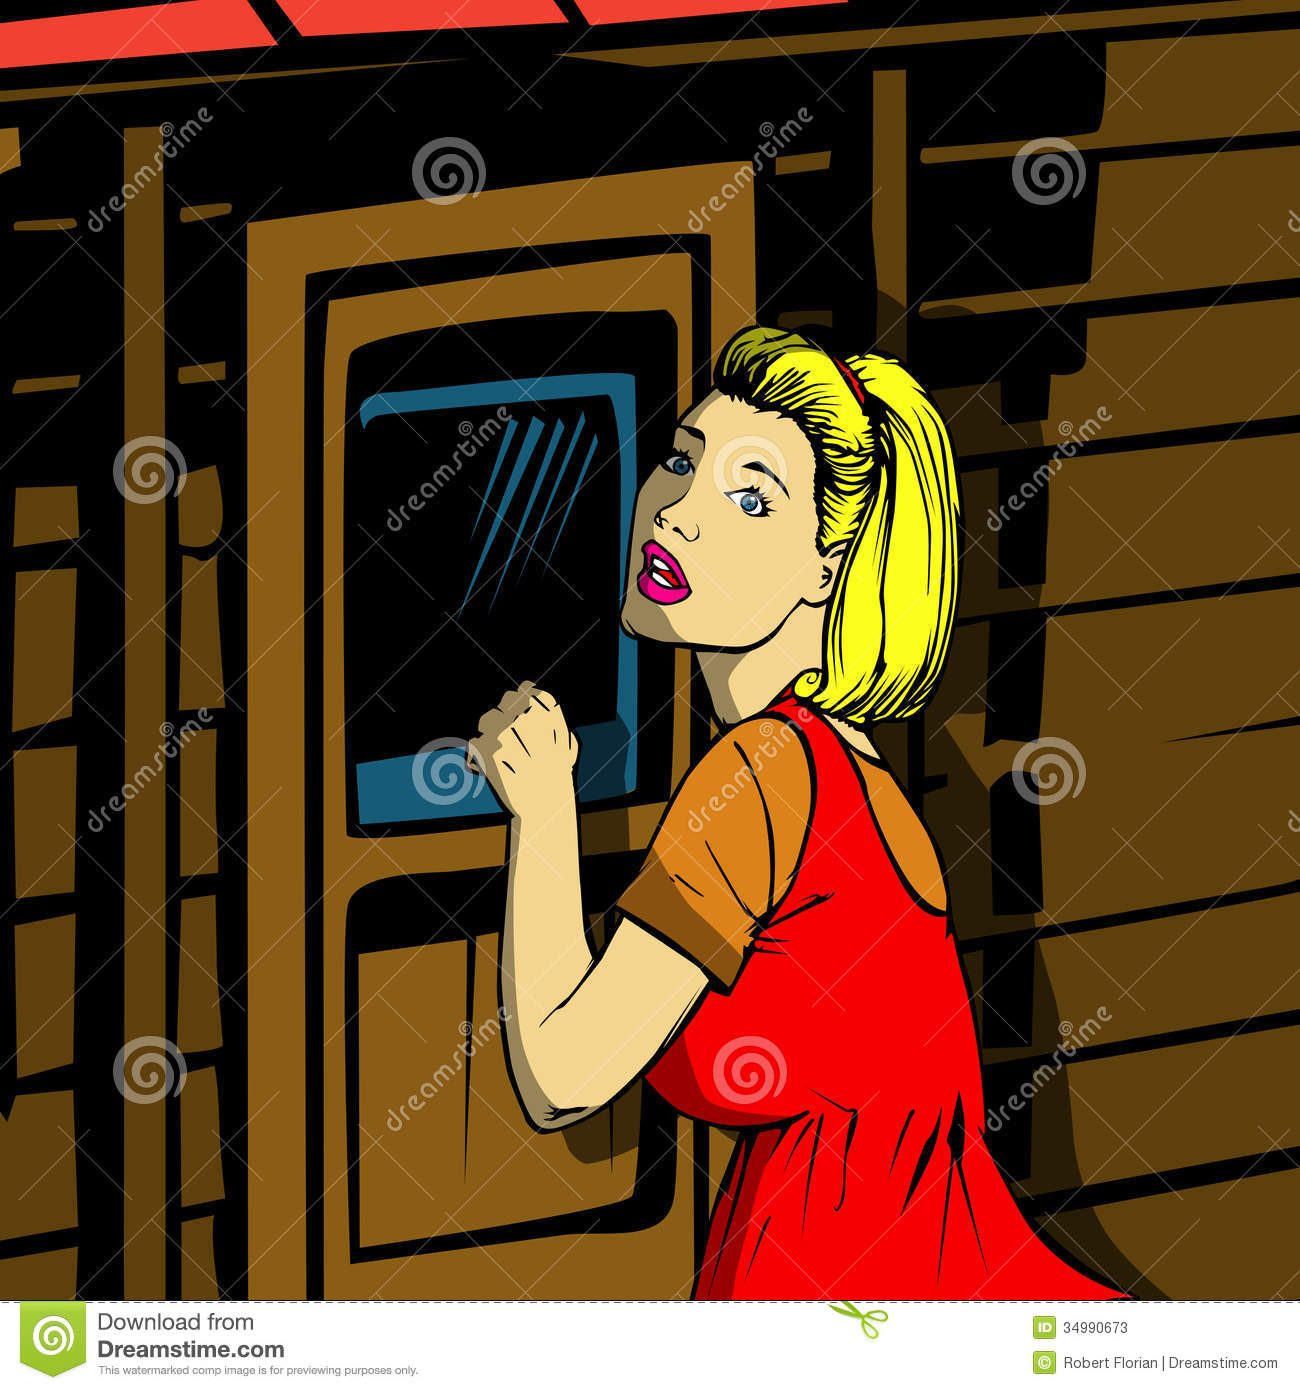 Book Style Illustration Of A Shocked Blonde Woman Knocking On A Door